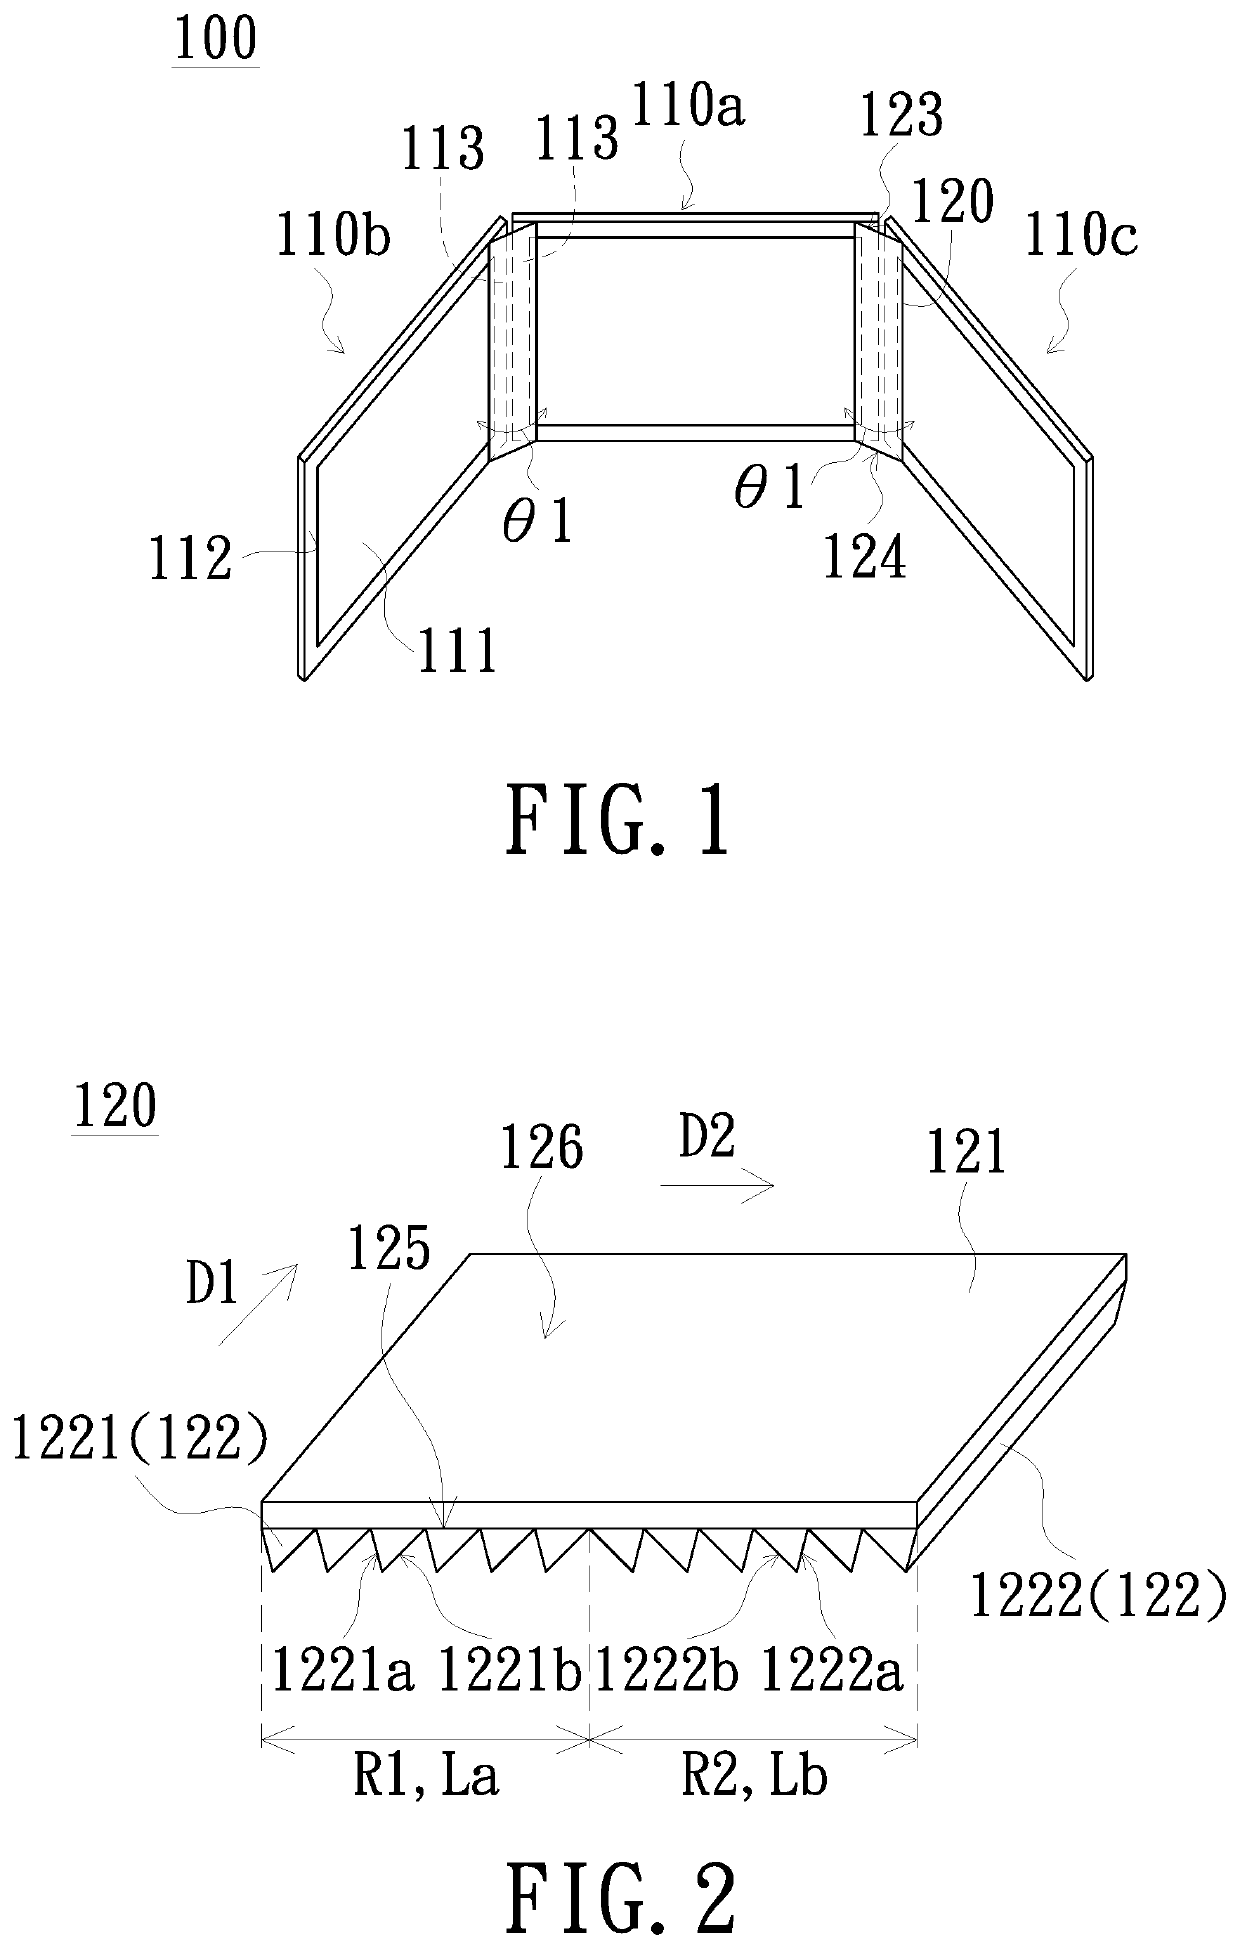 Display apparatus with multi screens